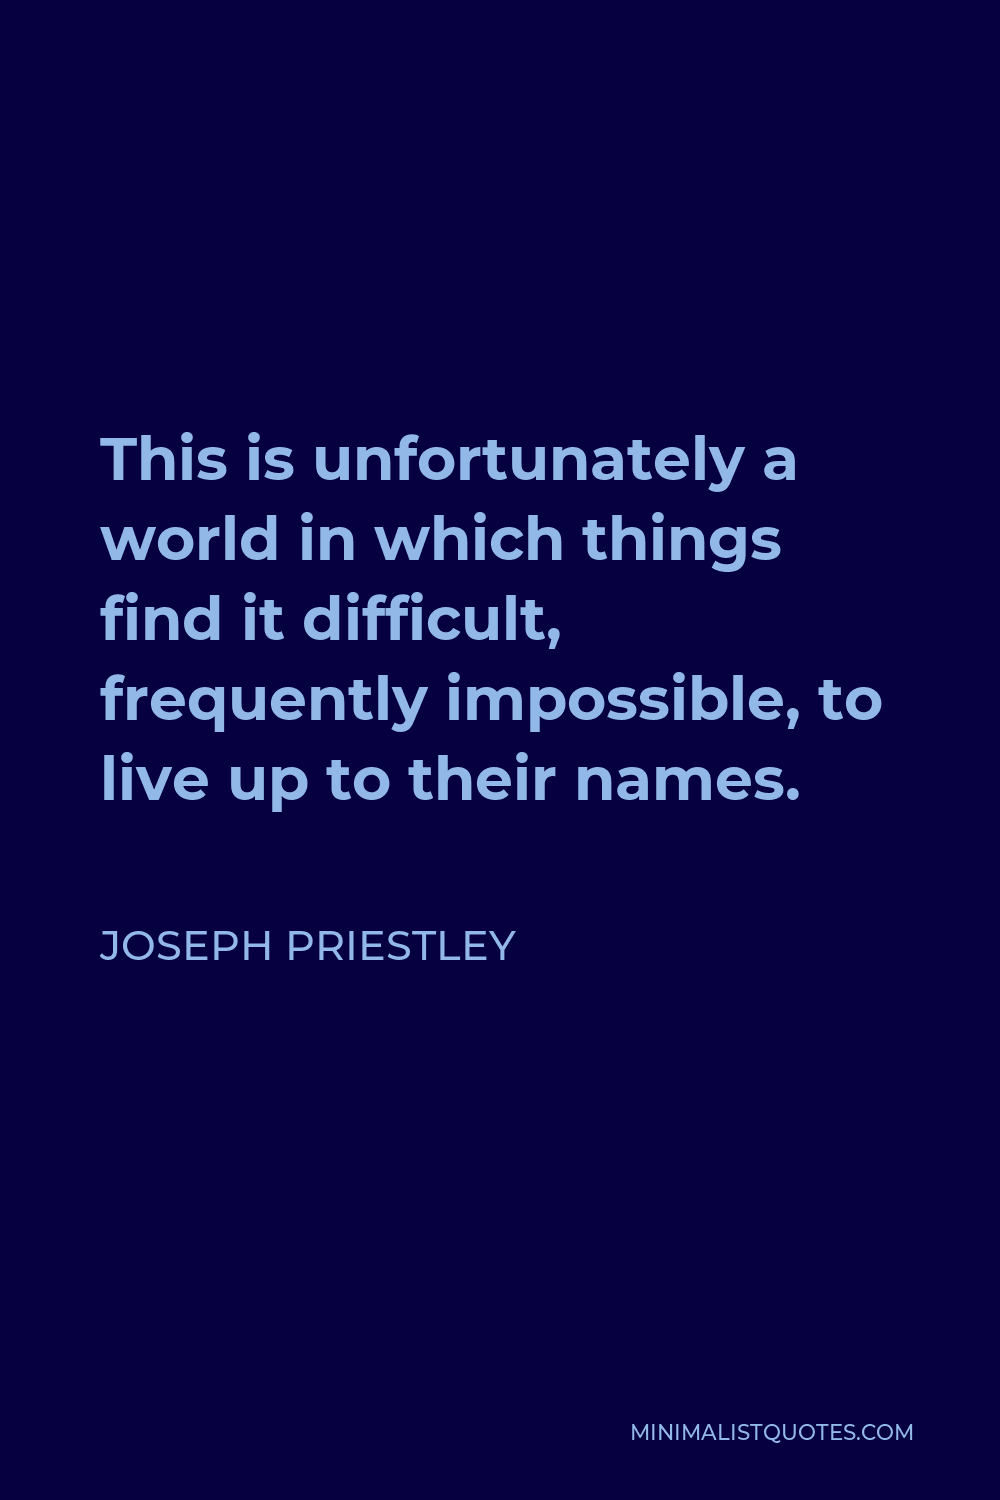 Joseph Priestley Quote - This is unfortunately a world in which things find it difficult, frequently impossible, to live up to their names.